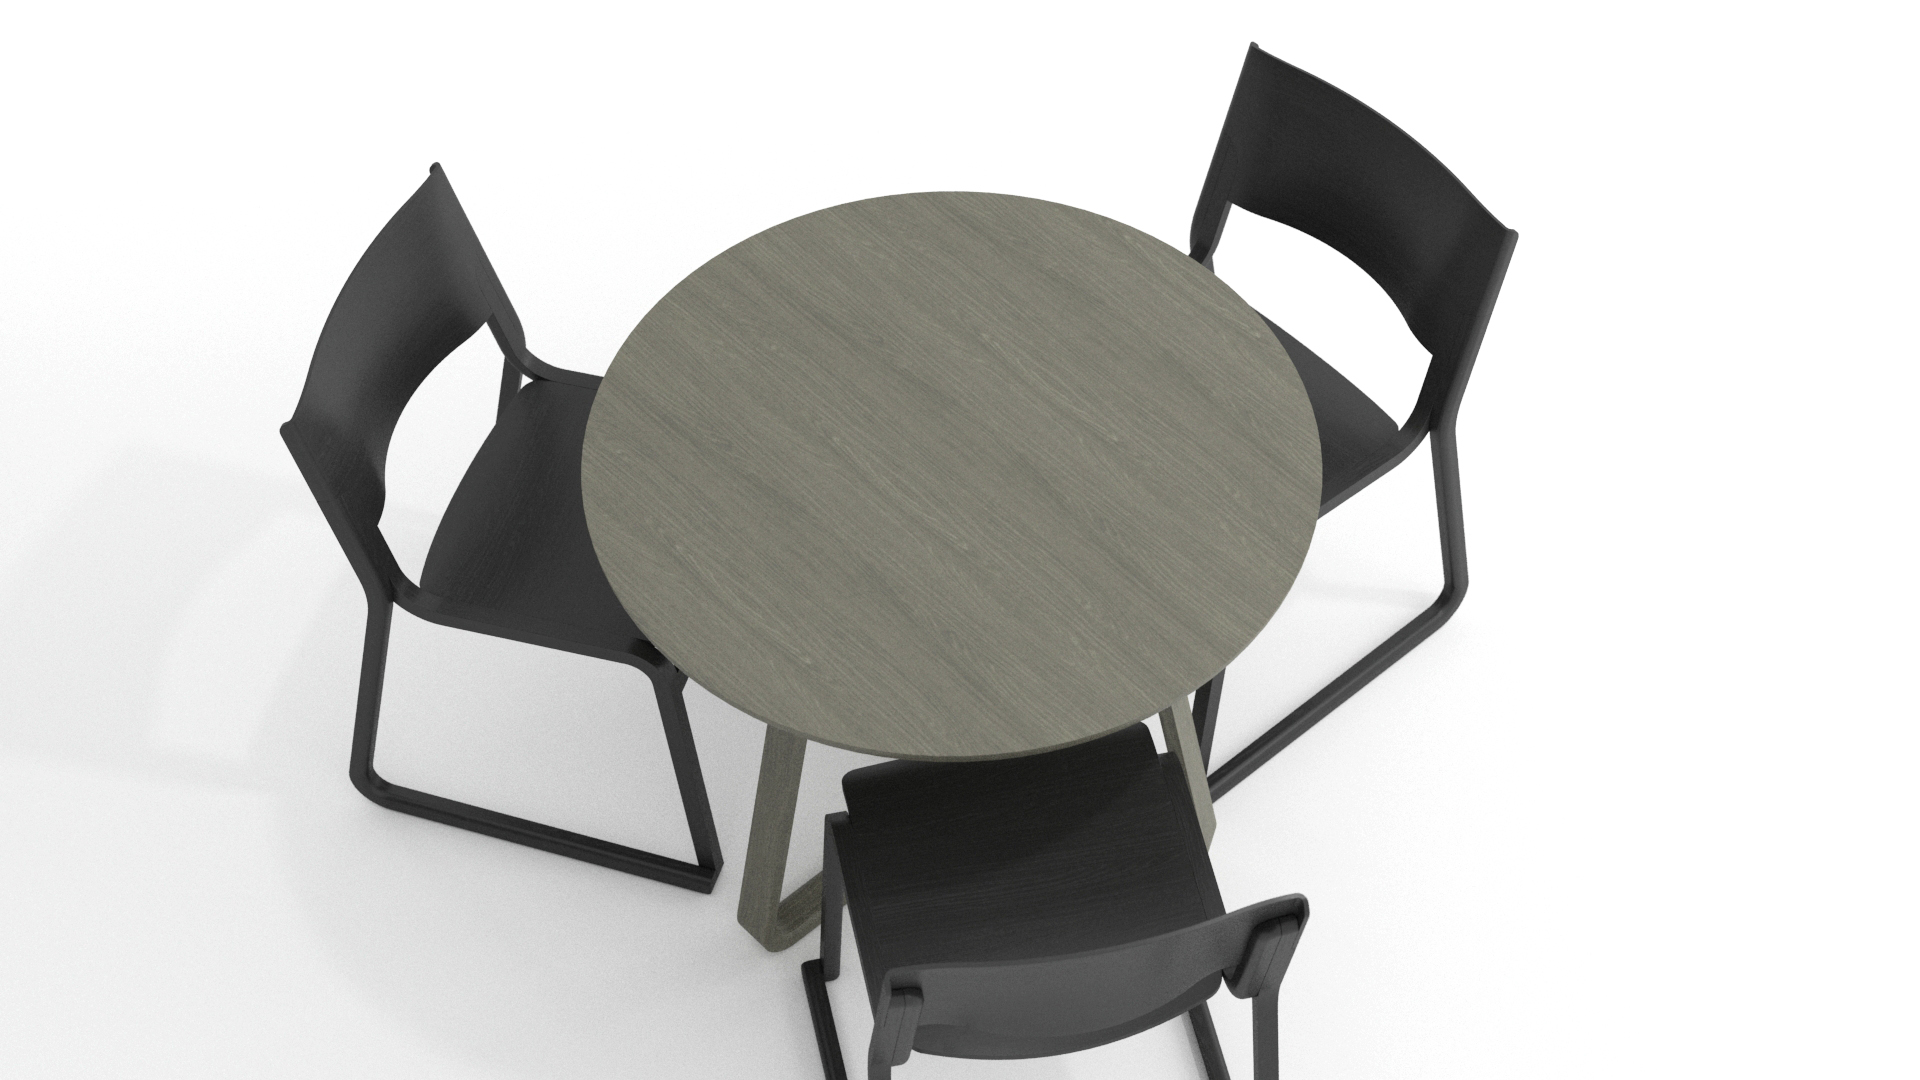 Round grey stained table for use as contract furniture with 3 matching wooden chairs.